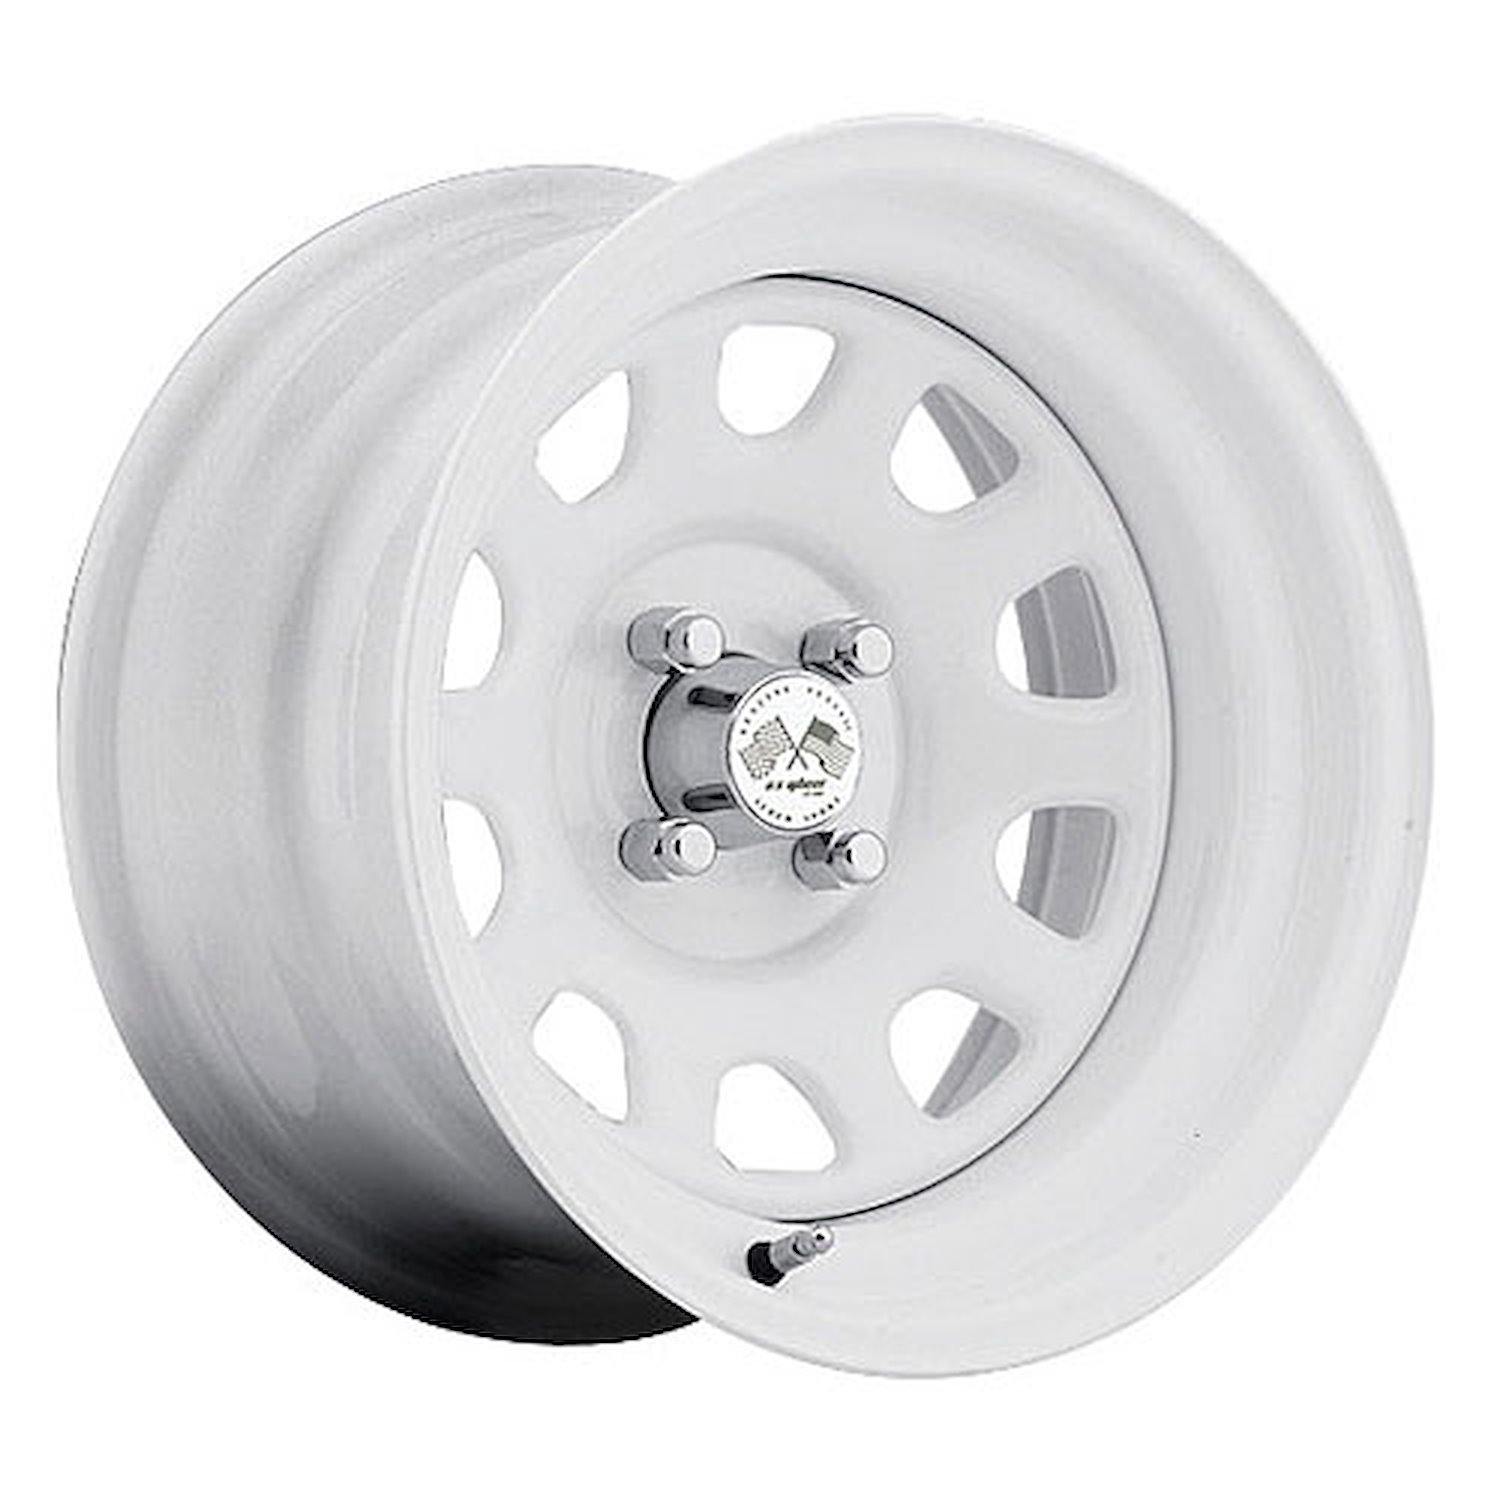 PAINTED DAYTONA FWD DRIFTER WHITE 16 x 10 4 x 45 Bolt Circle 5 12 Back Spacing 0 offset 266 Center Bore 1400 lbs Load Rating